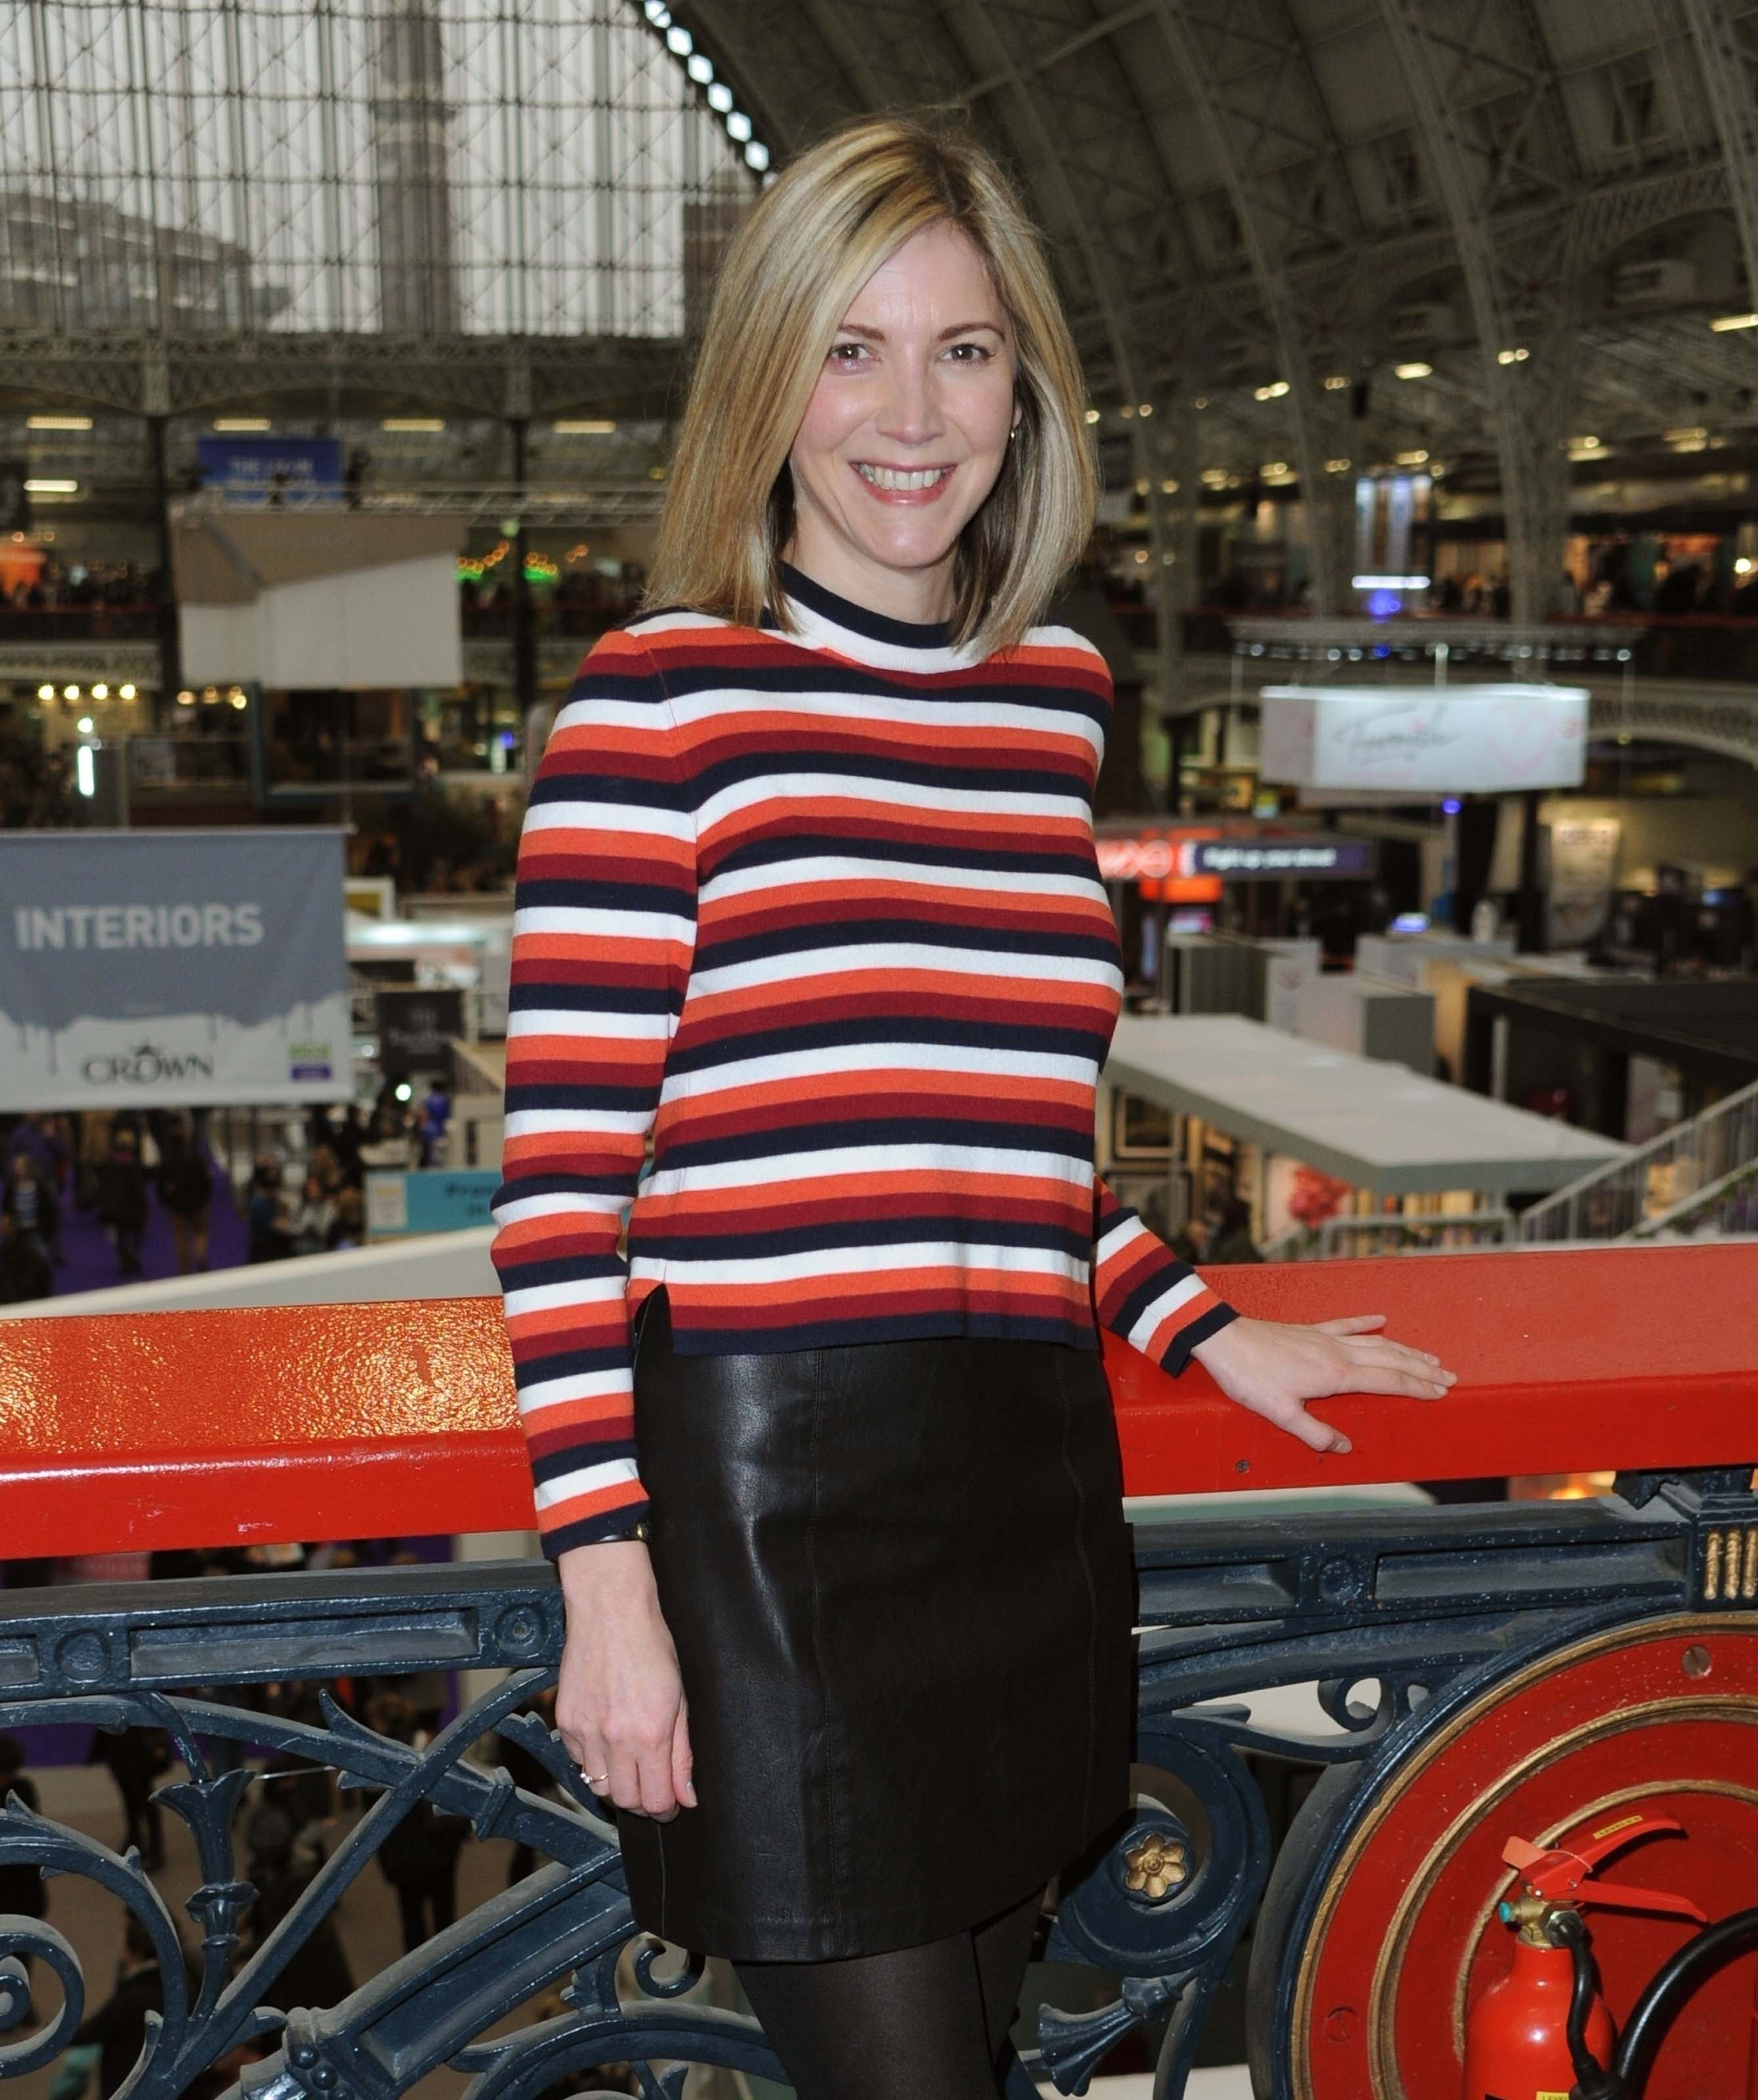 Lisa Faulkner at the 2018 Ideal Home Show